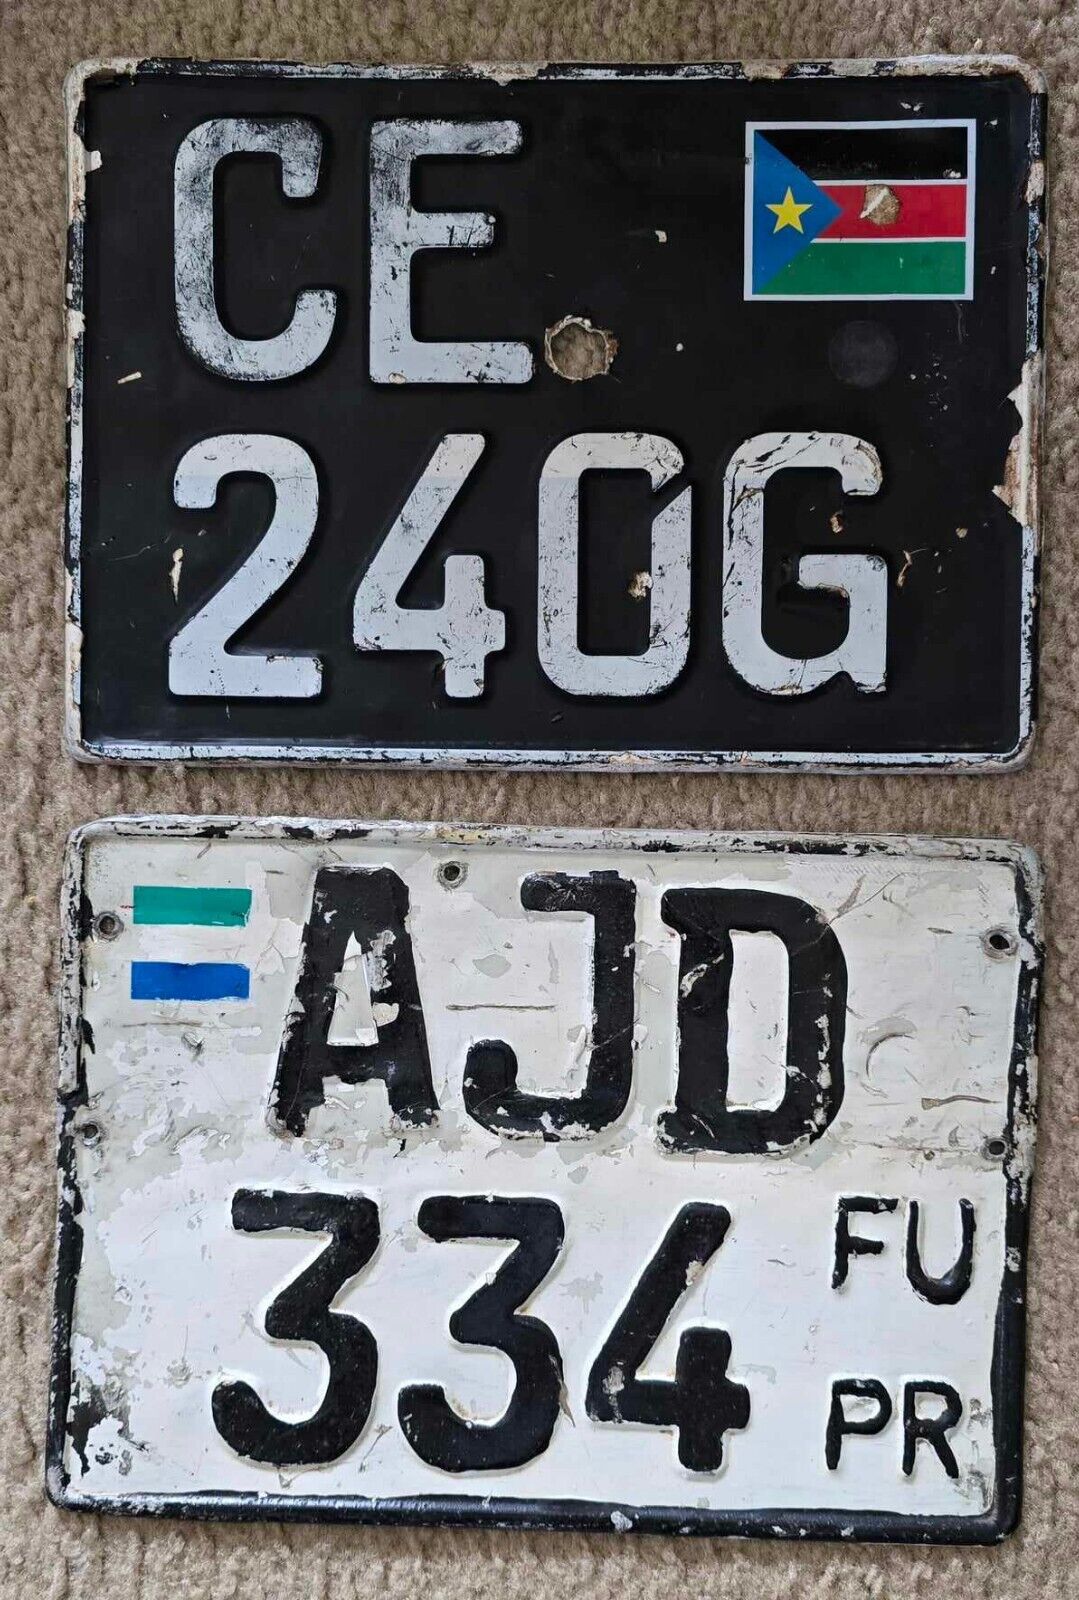 South Sudan license plate SOUTH SUDANESE number plate AFRICA plus SIERRA LEONE